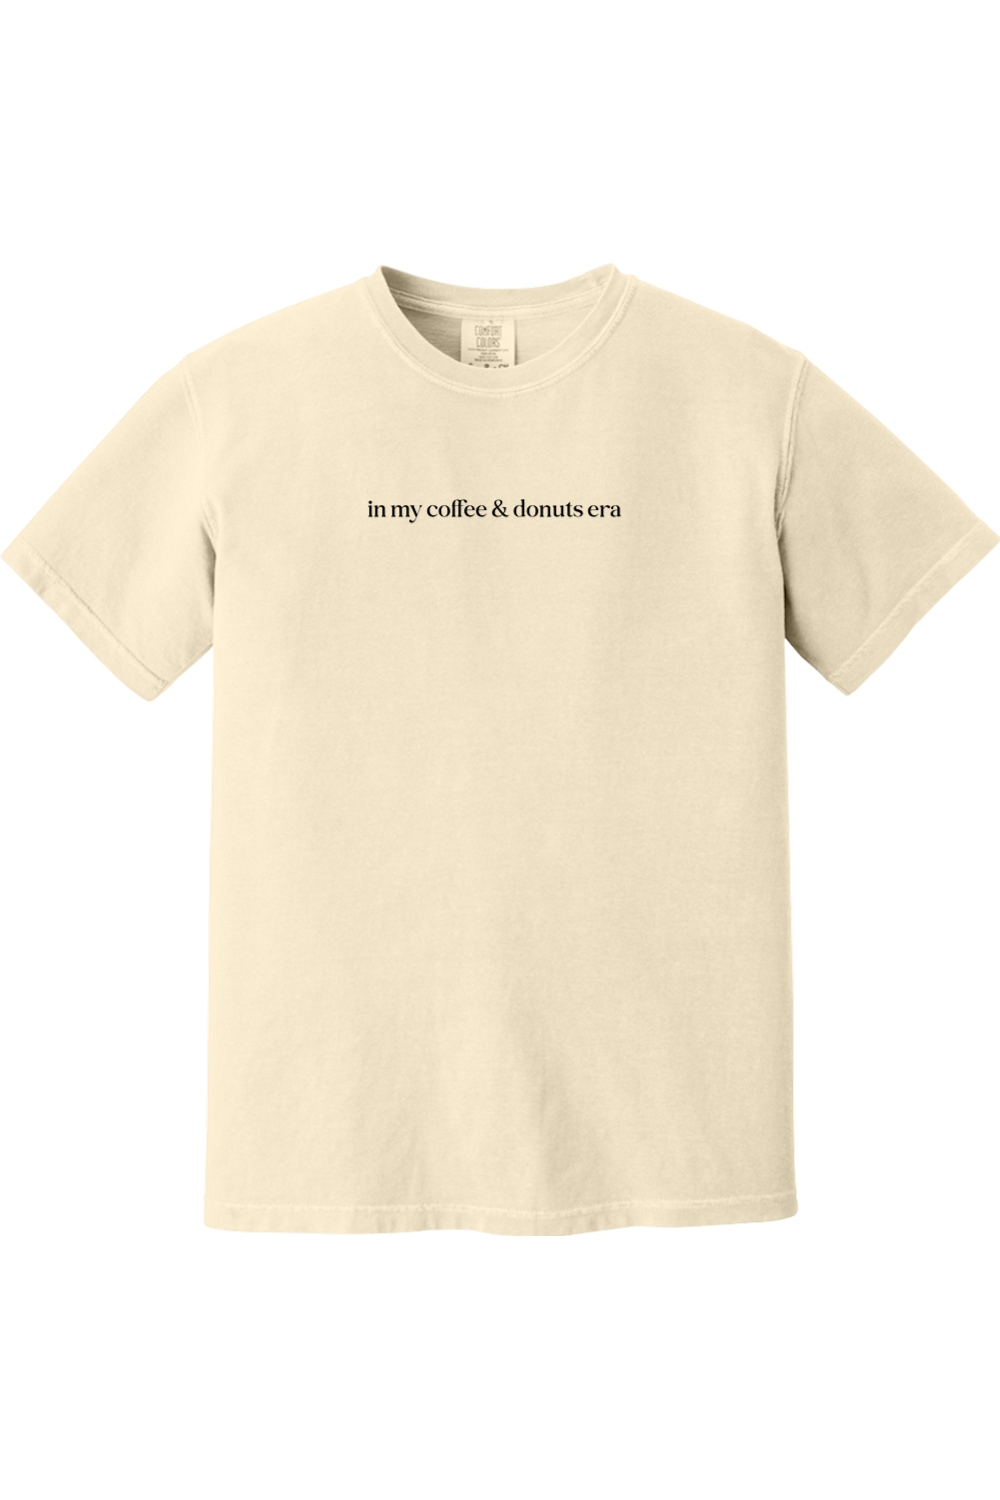 In My Coffee & Donuts Era Adult T-shirt - Comfort Colors